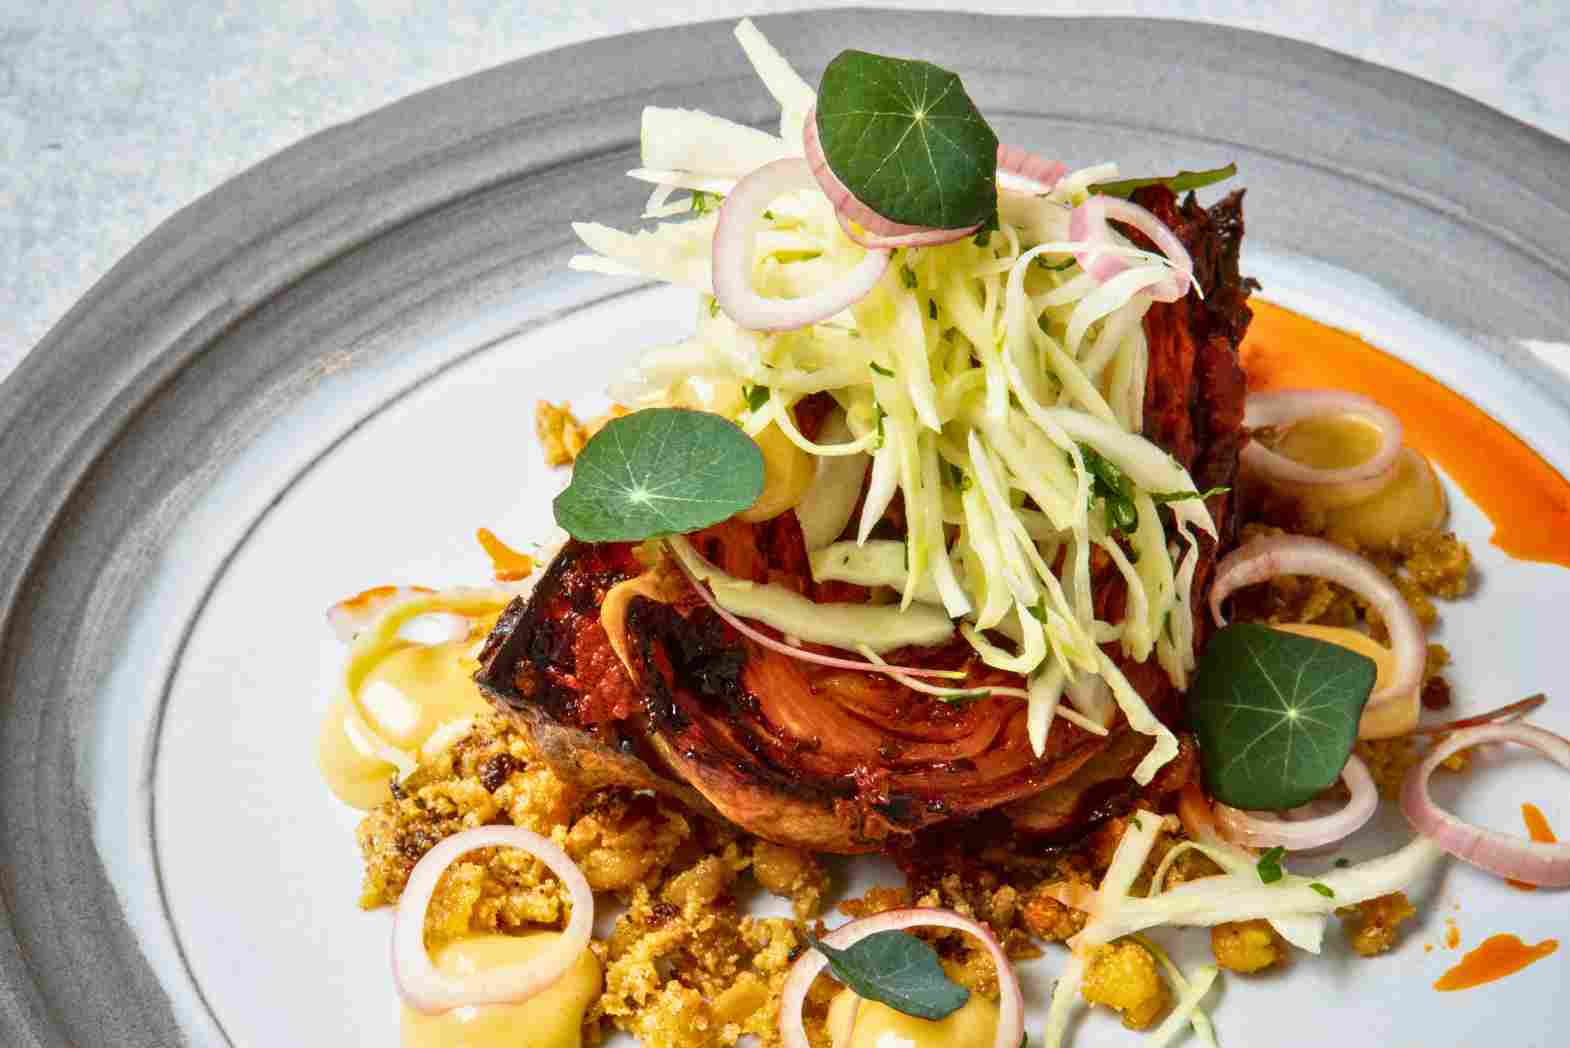 Harissa-Roasted Cabbage with Miso Aioli, Pickled Shallots & Crispy Chickpeas - by Chantelle Nicholson